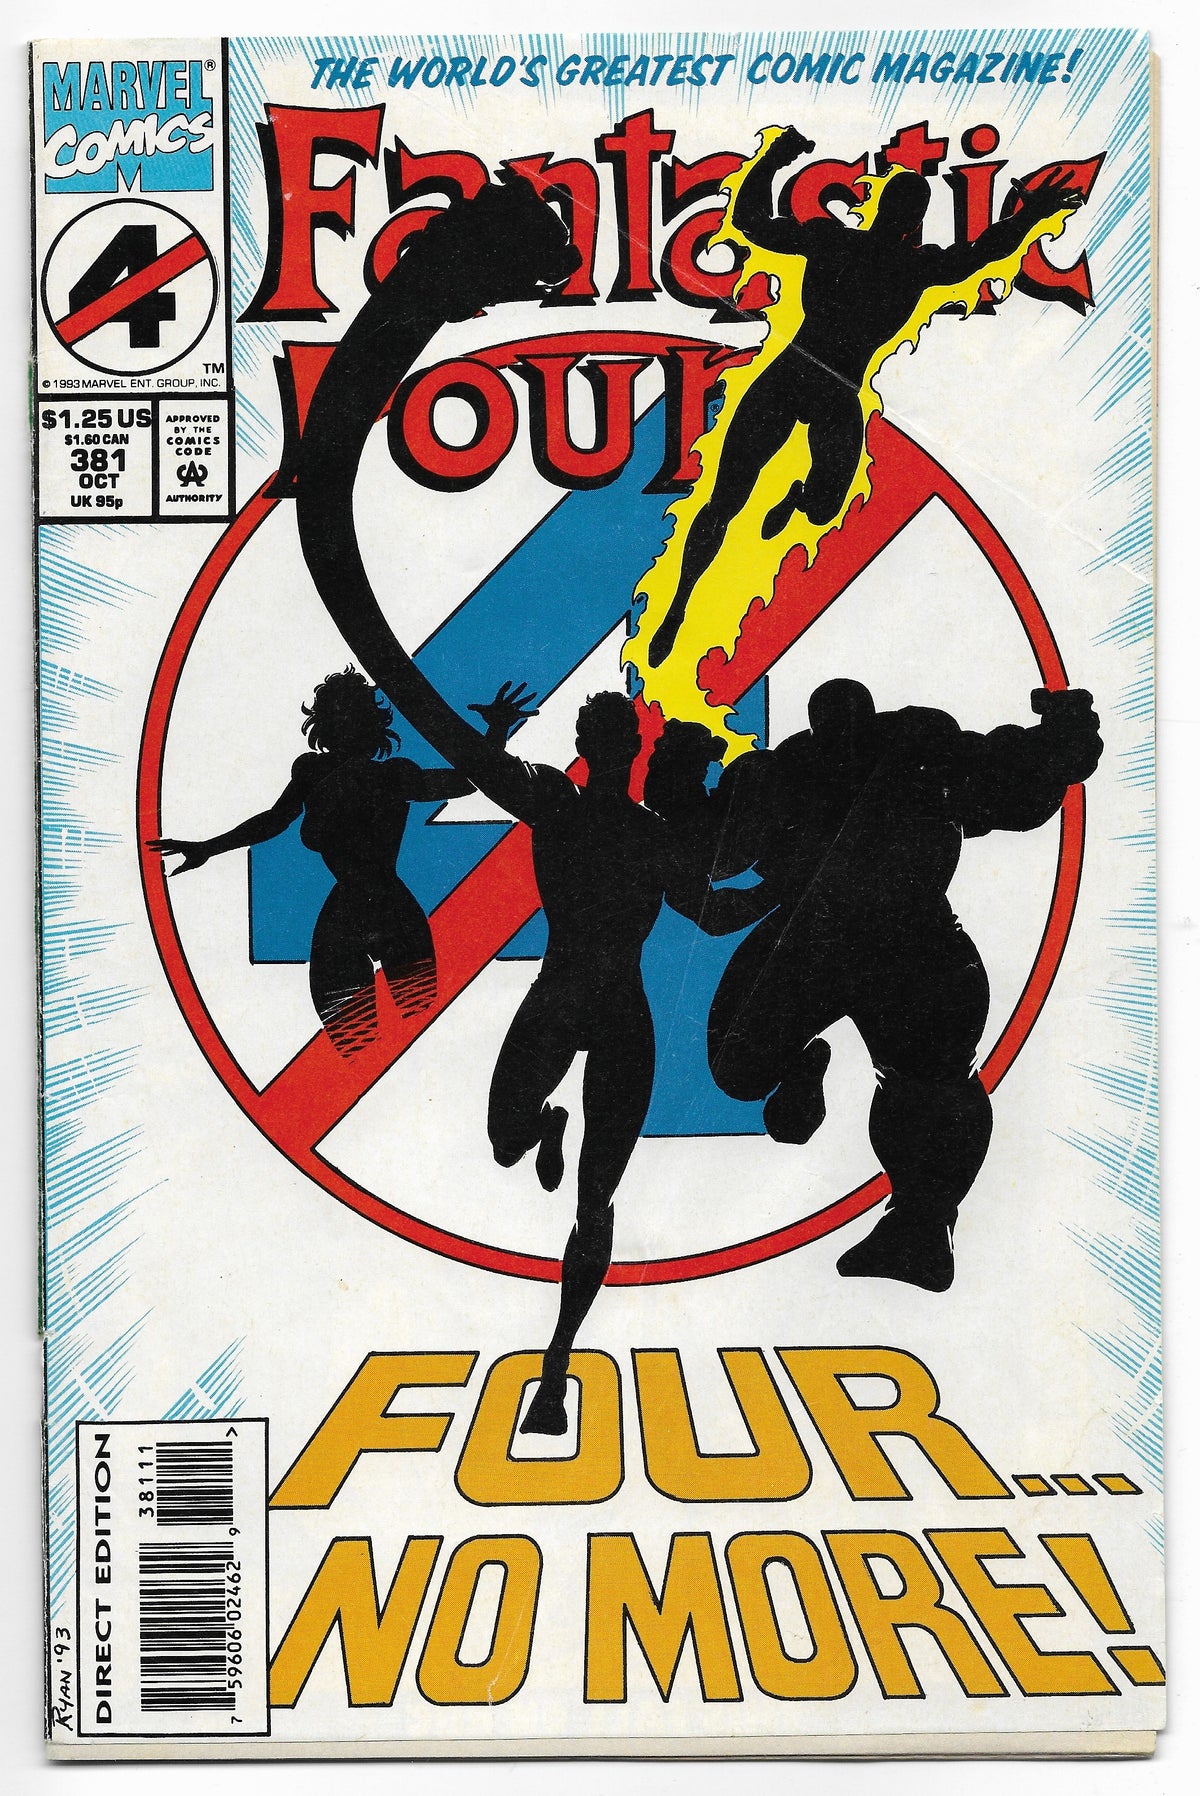 Photo of Fantastic Four, Vol. 1 (1993)  Iss 381A   Comic sold by Stronghold Collectibles